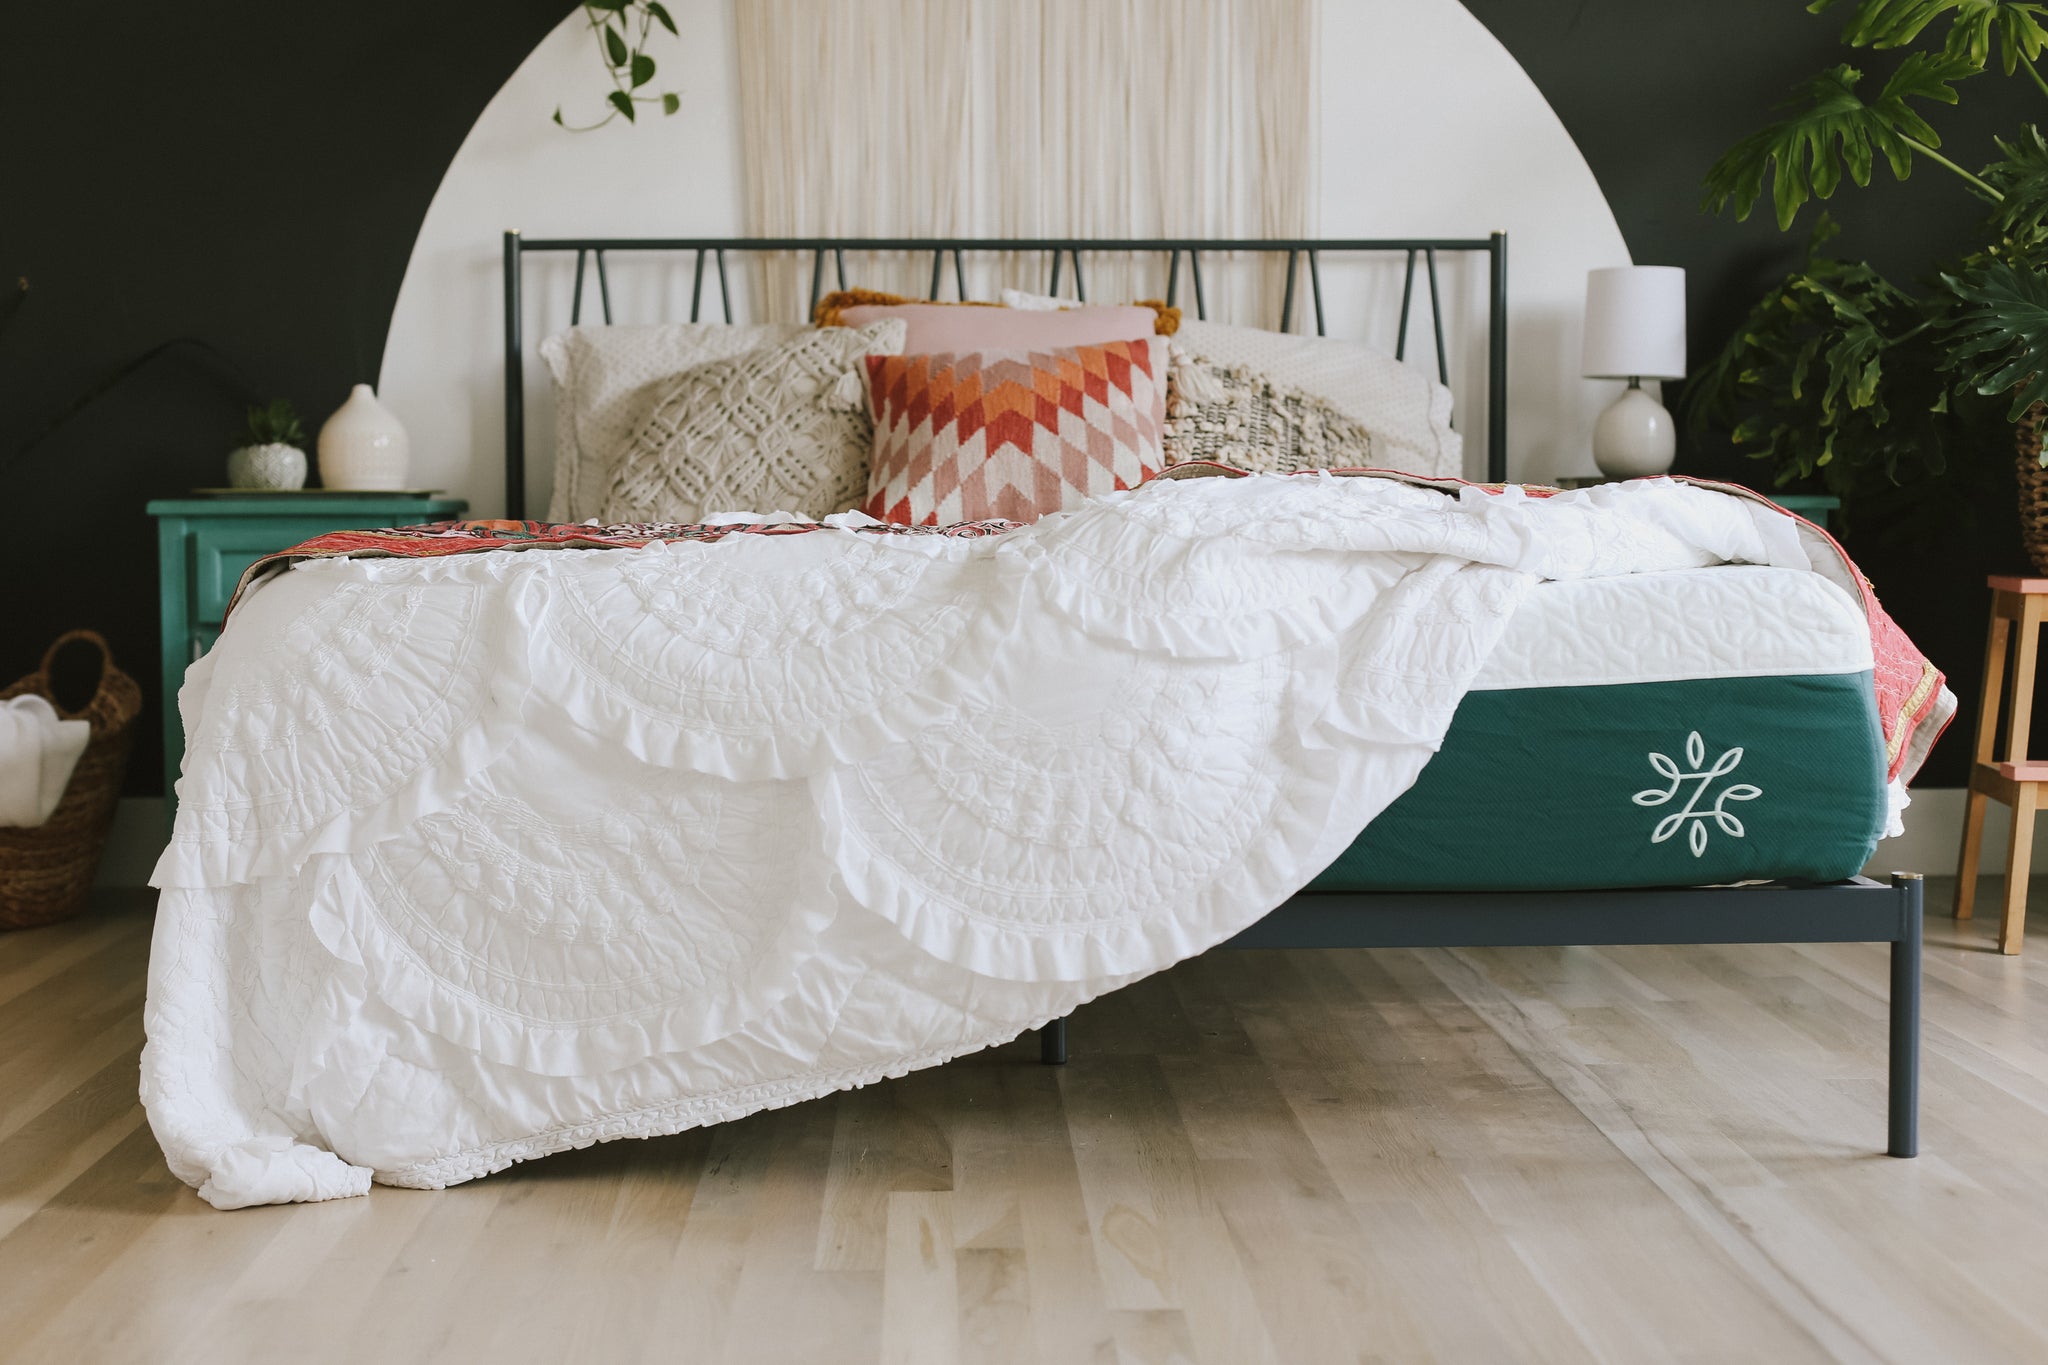 California King Size Bed Dimensions – A Buying Guide